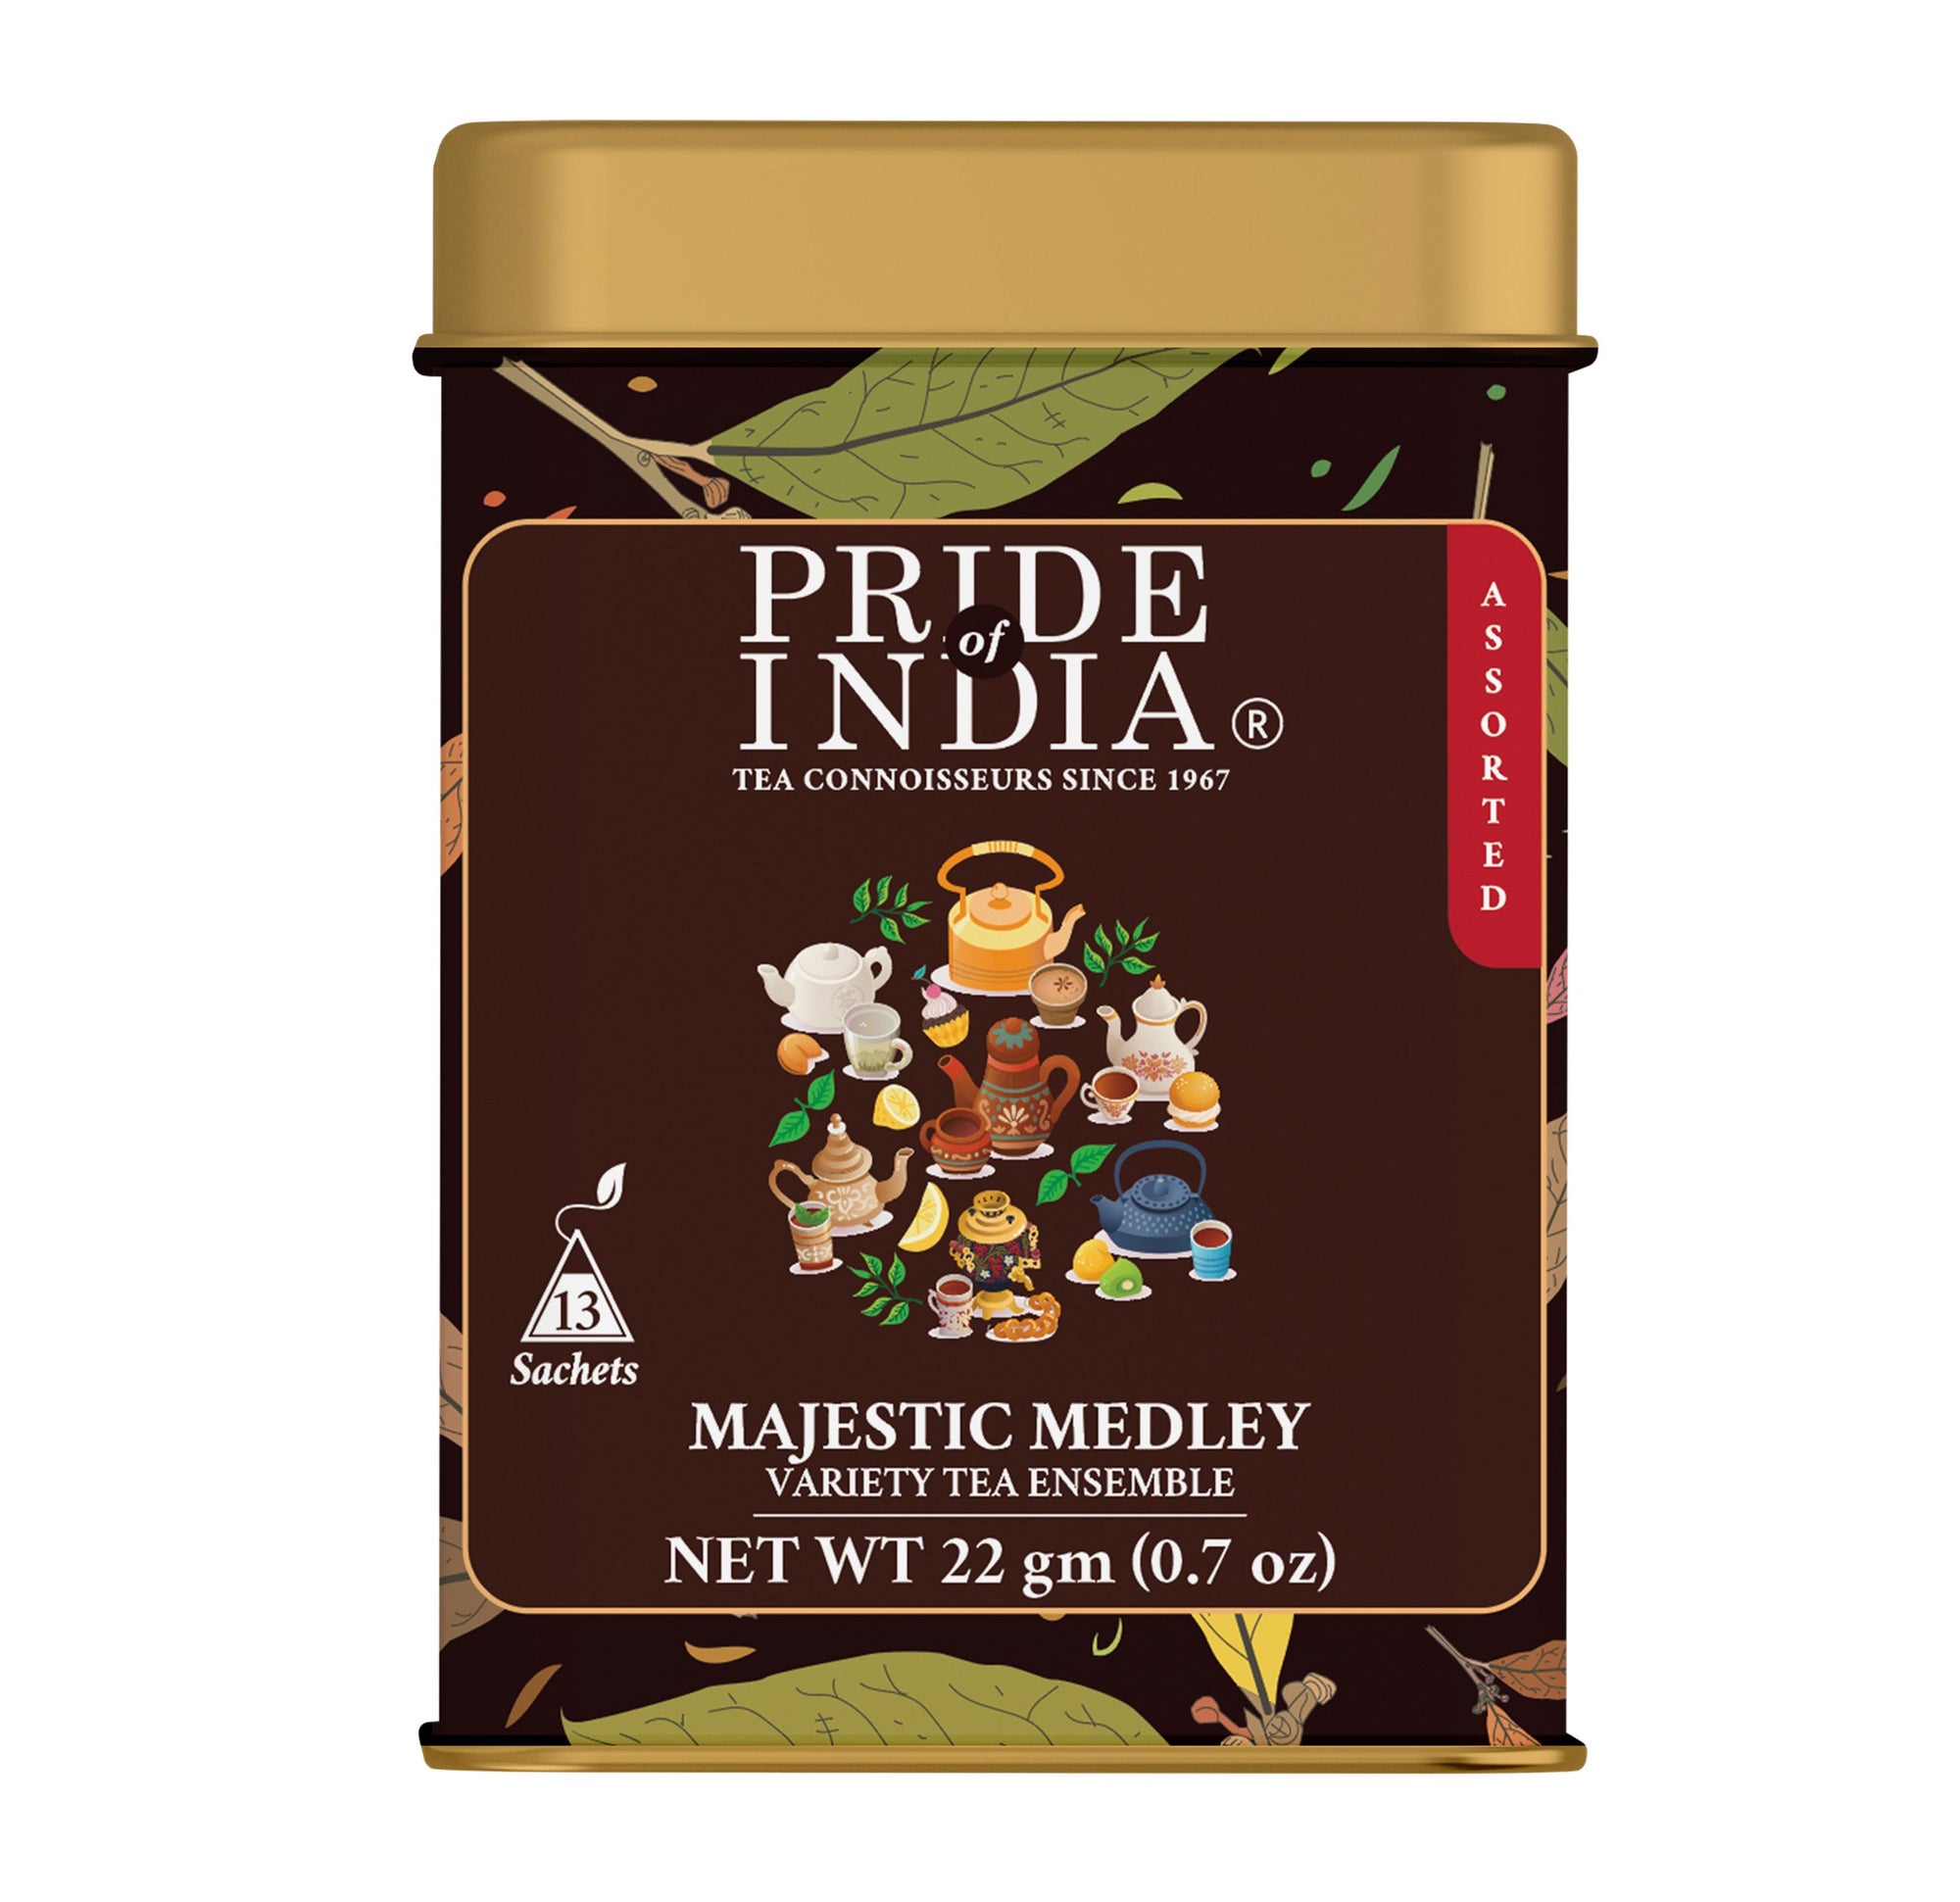 Majestic Medley - Variety Tea Enssemble Bags - Pride Of India